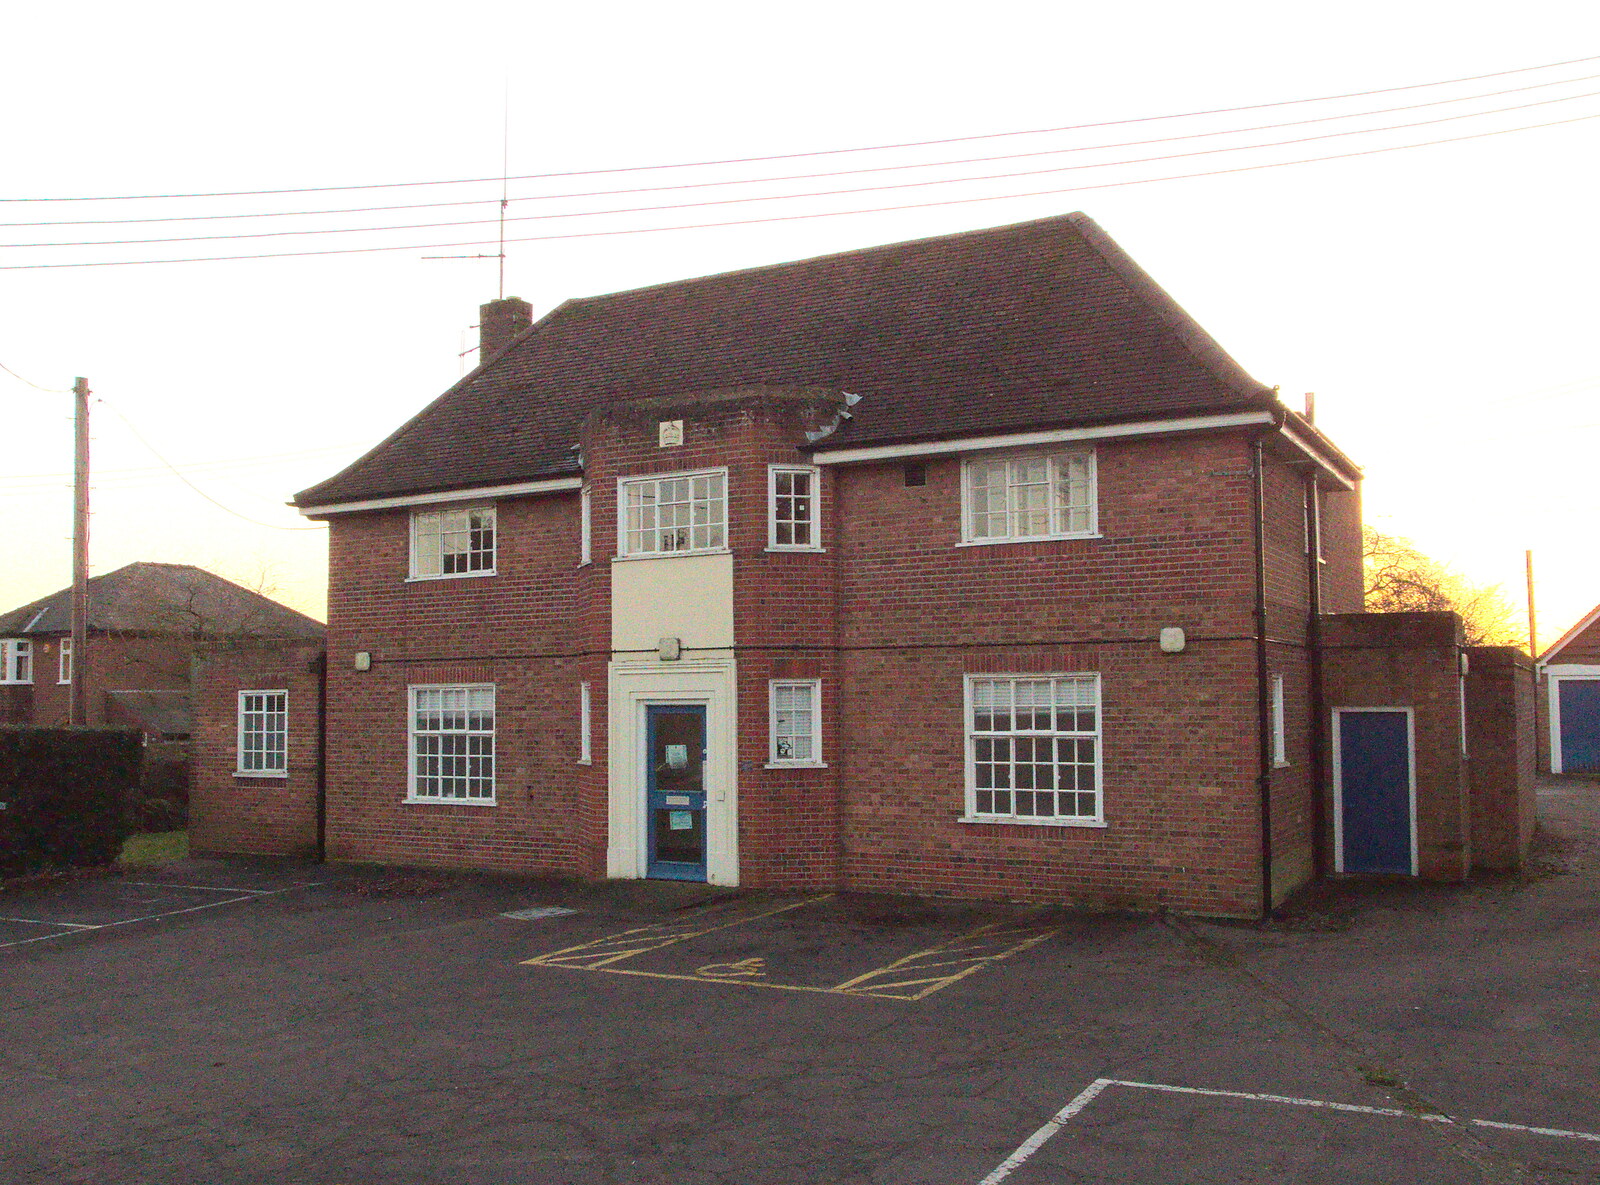 The Eye police station on Victoria Hill from Closing Down: A Late January Miscellany, Diss, Norfolk - 31st January 2015